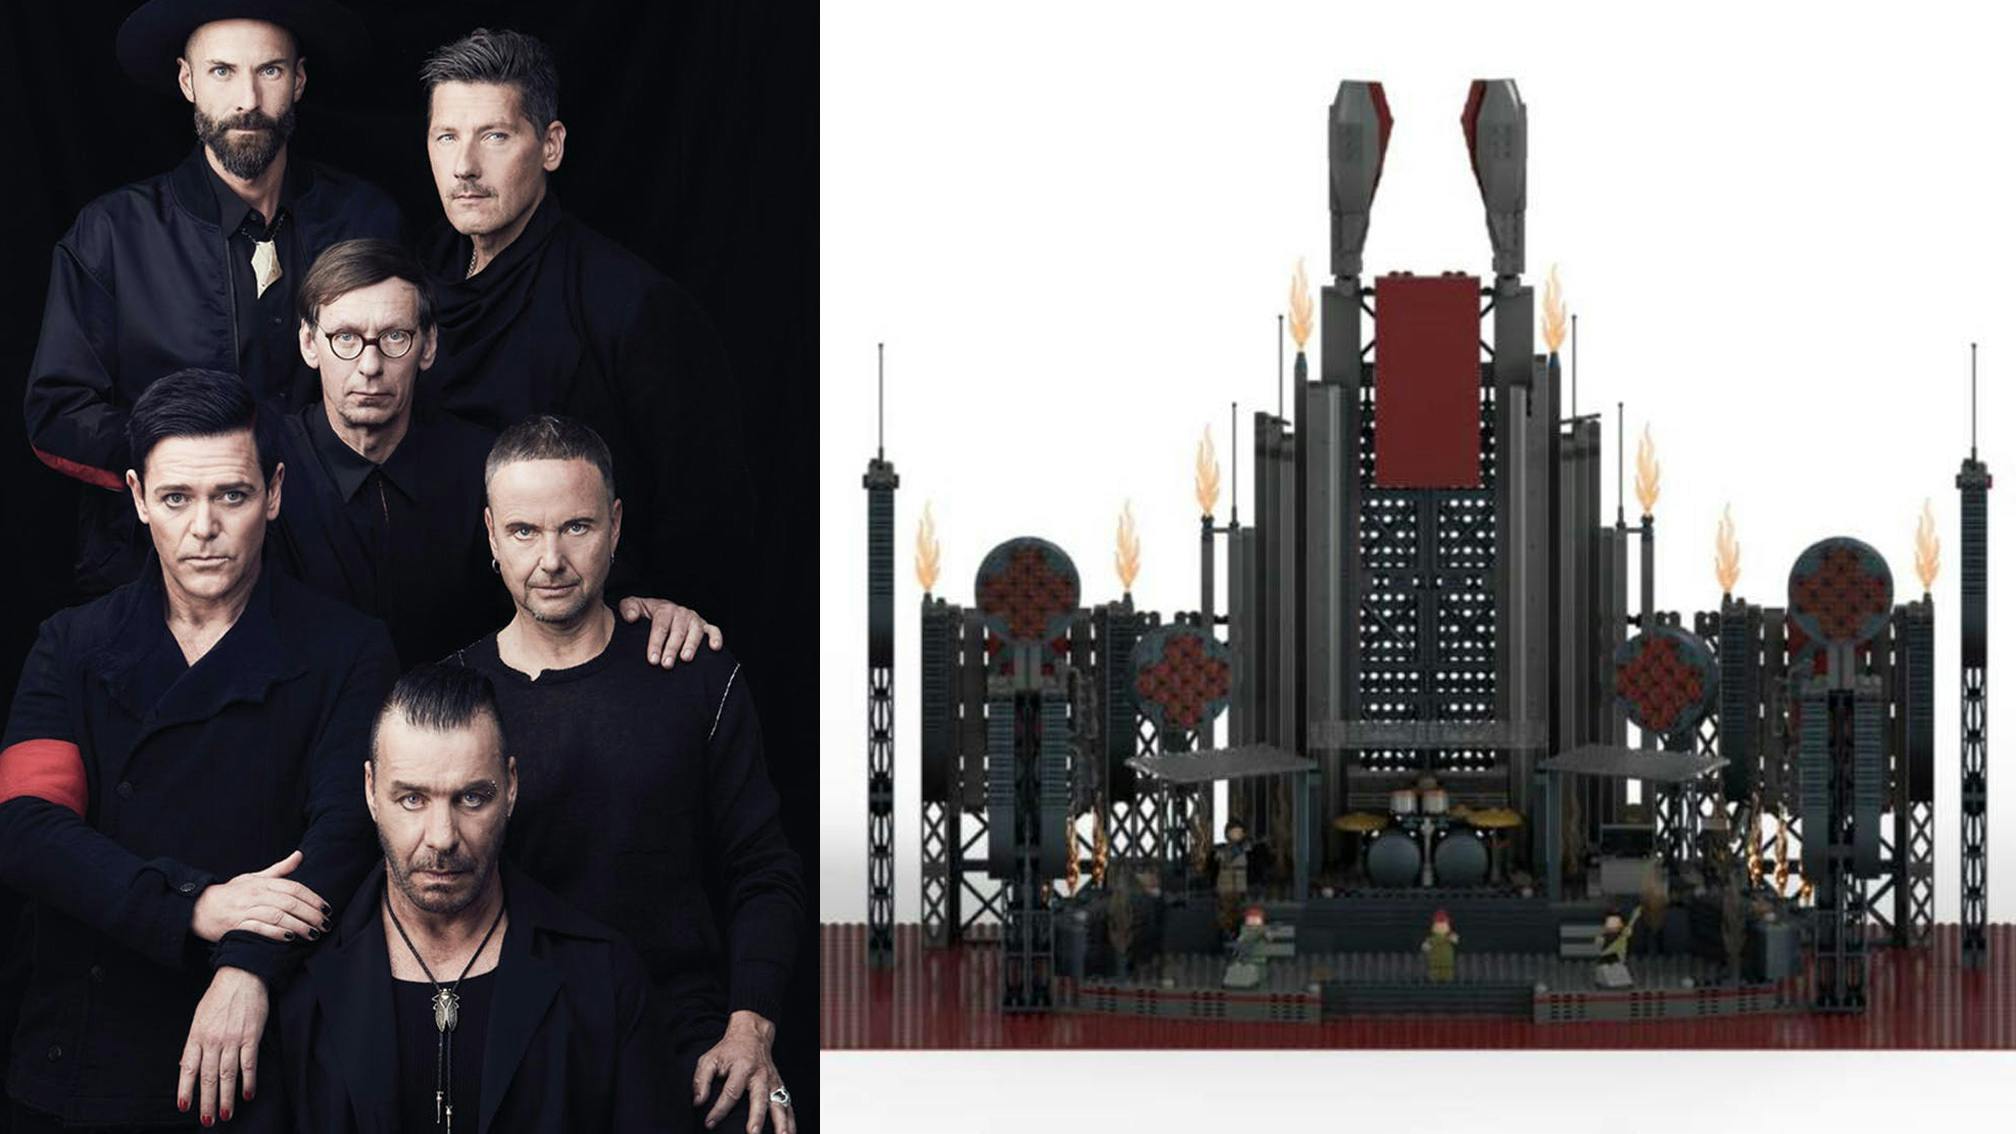 Rammstein approve of this campaign for a LEGO set of their stage show